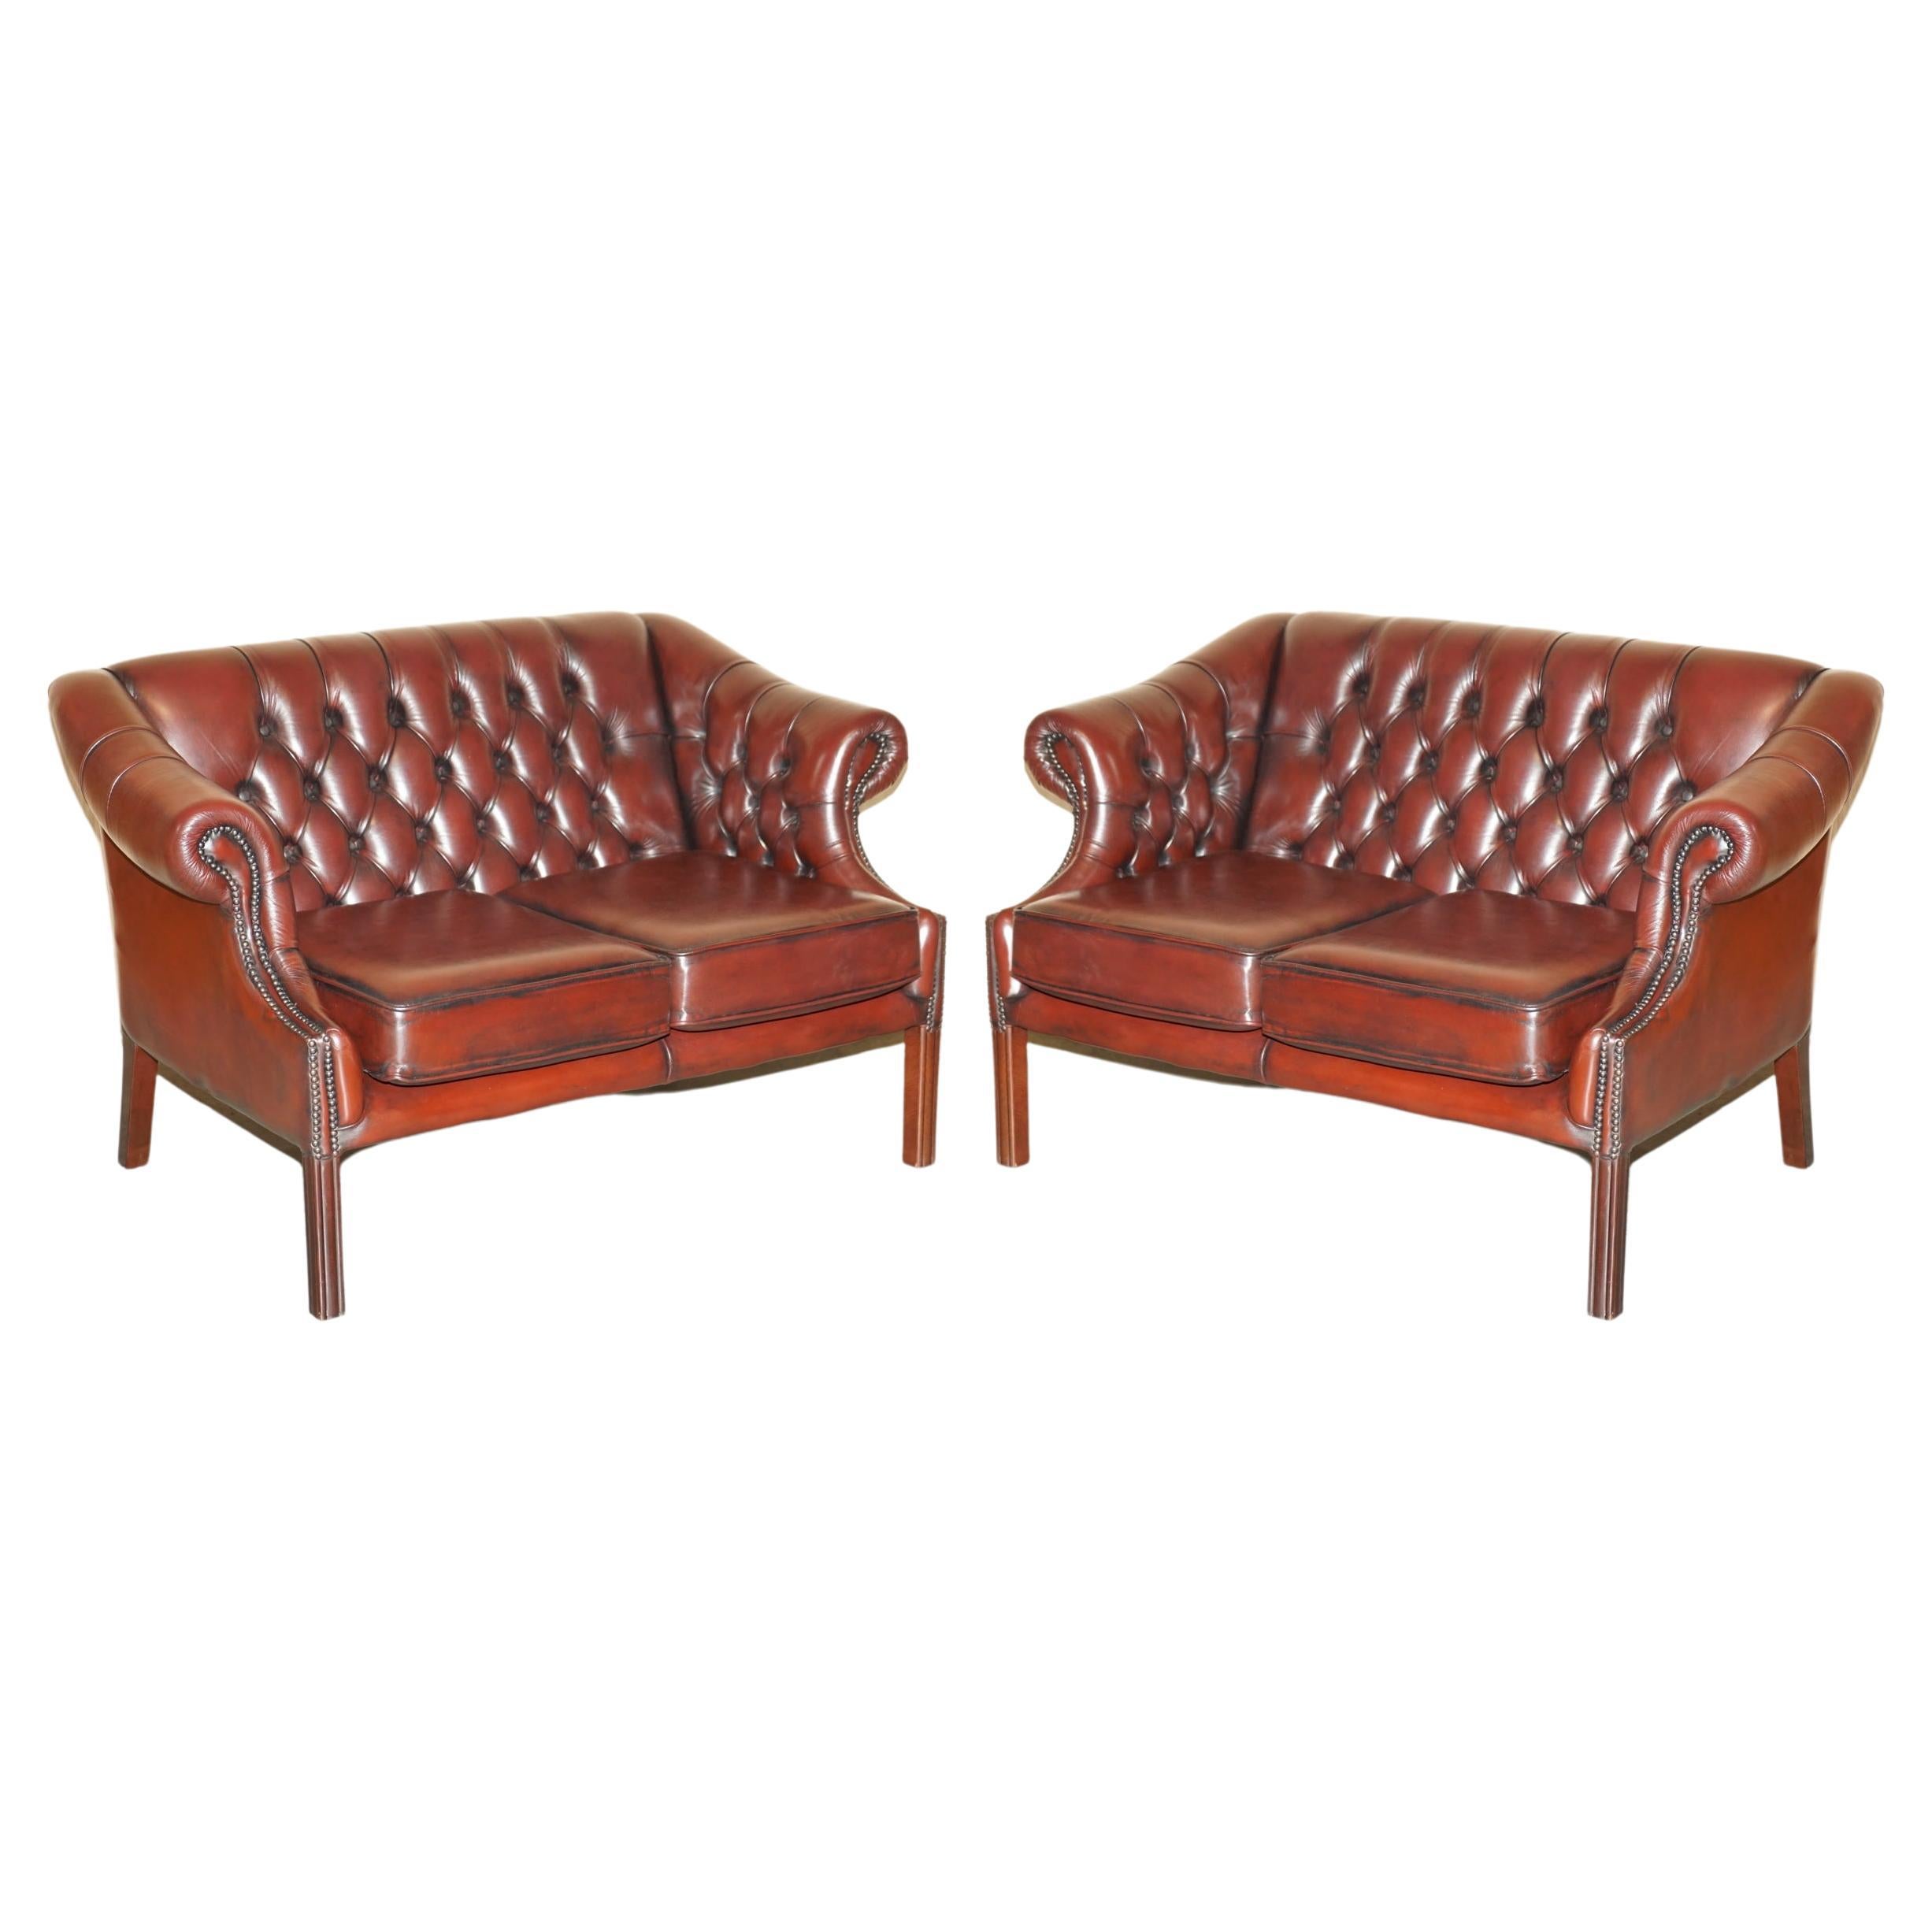 Pair of Harrods London Restored Bordeaux Brown Leather Chesterfield Tufted Sofas